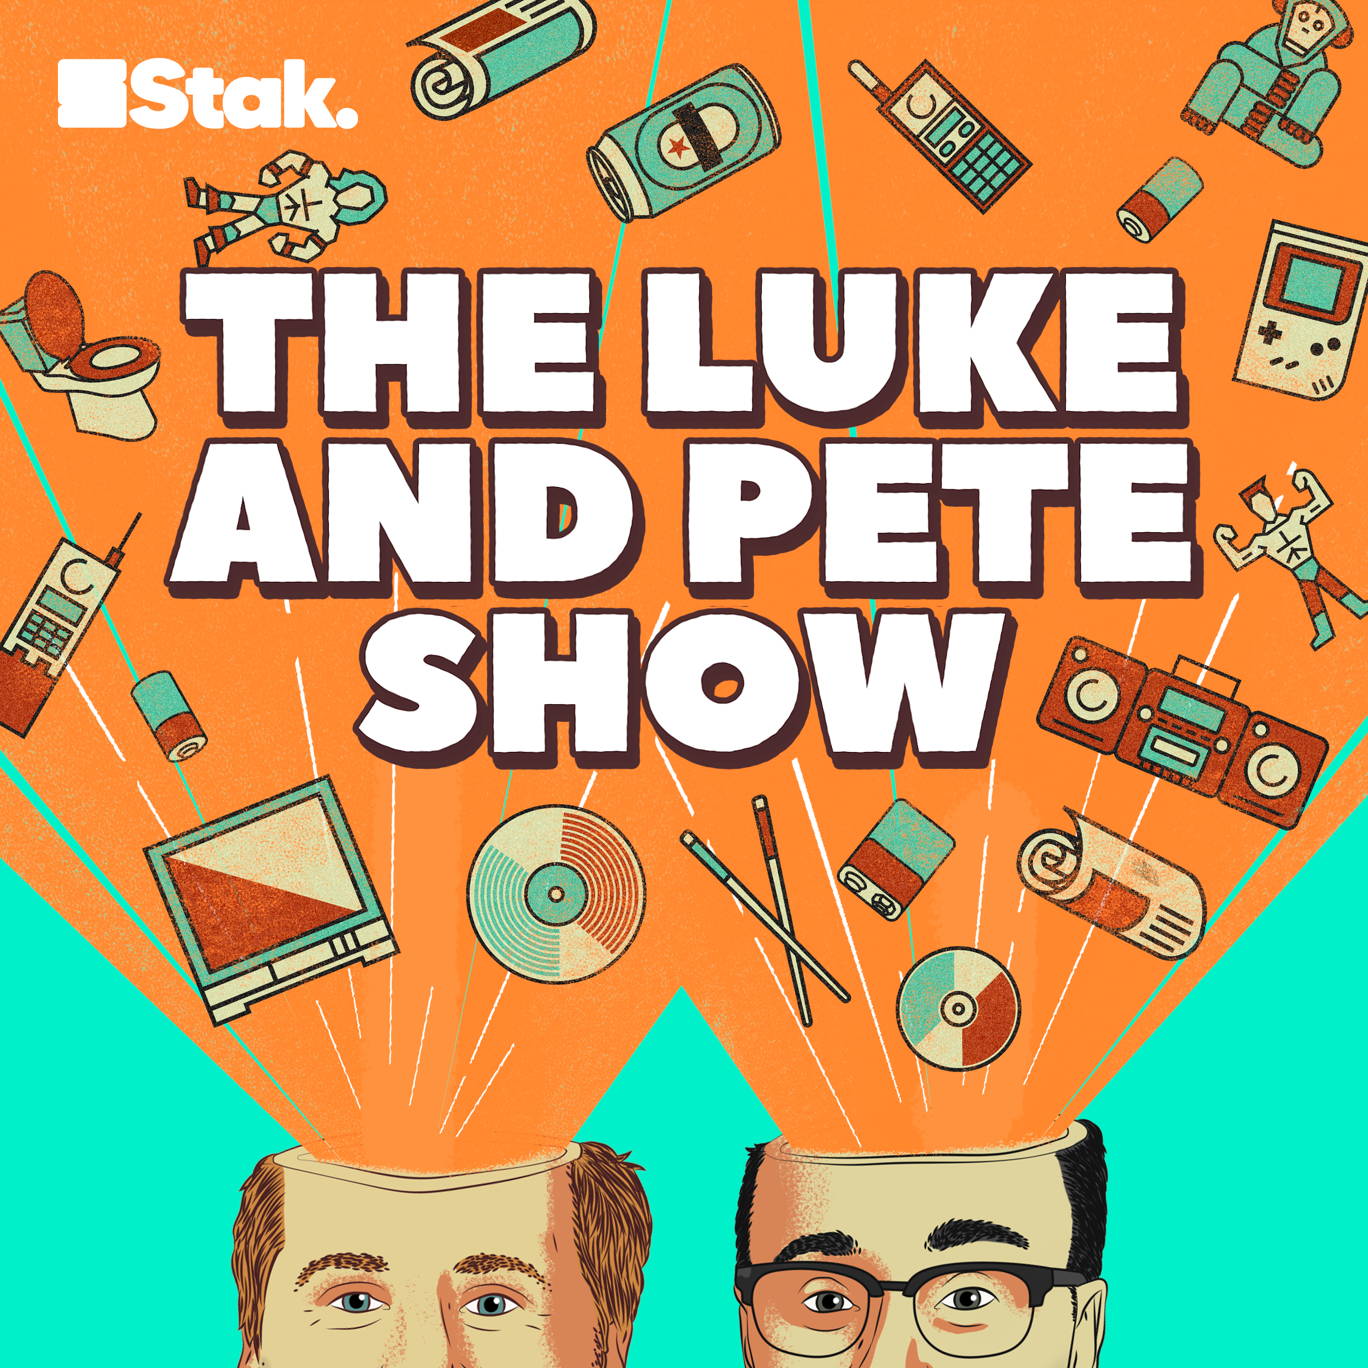 The artwork for the The Luke and Pete Show podcast.